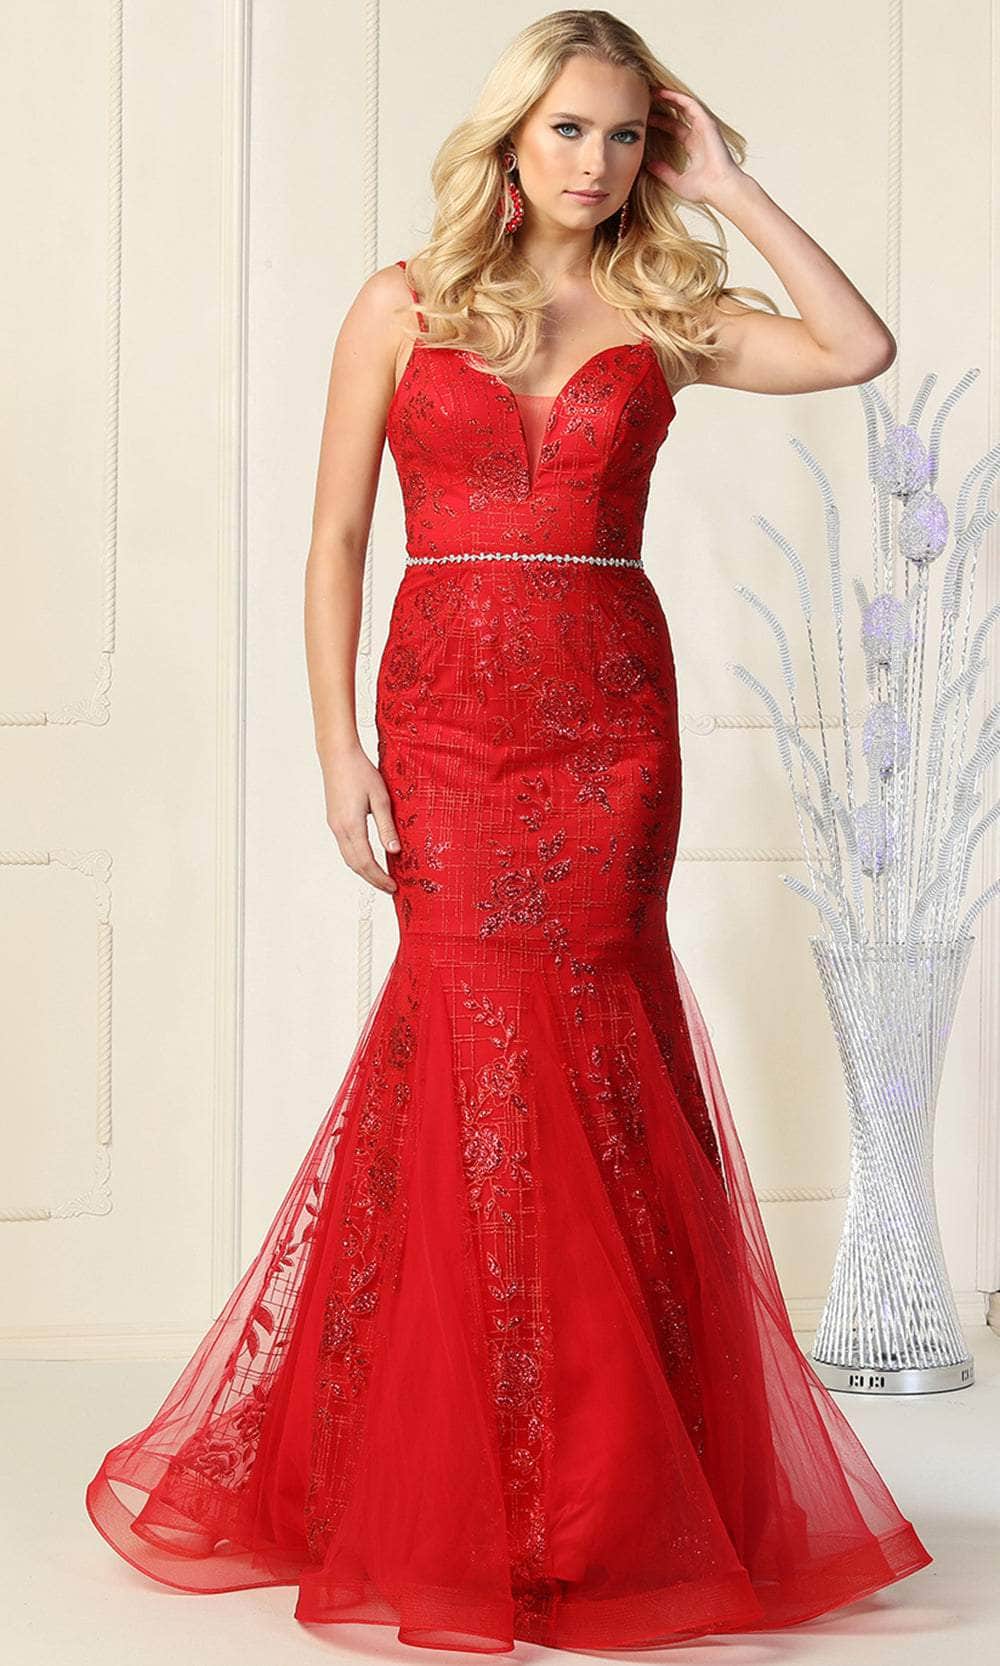 May Queen MQ1842 - Floral Beaded Plunging V-Neck Mermaid Gown Special Occasion Dress 4 / Red